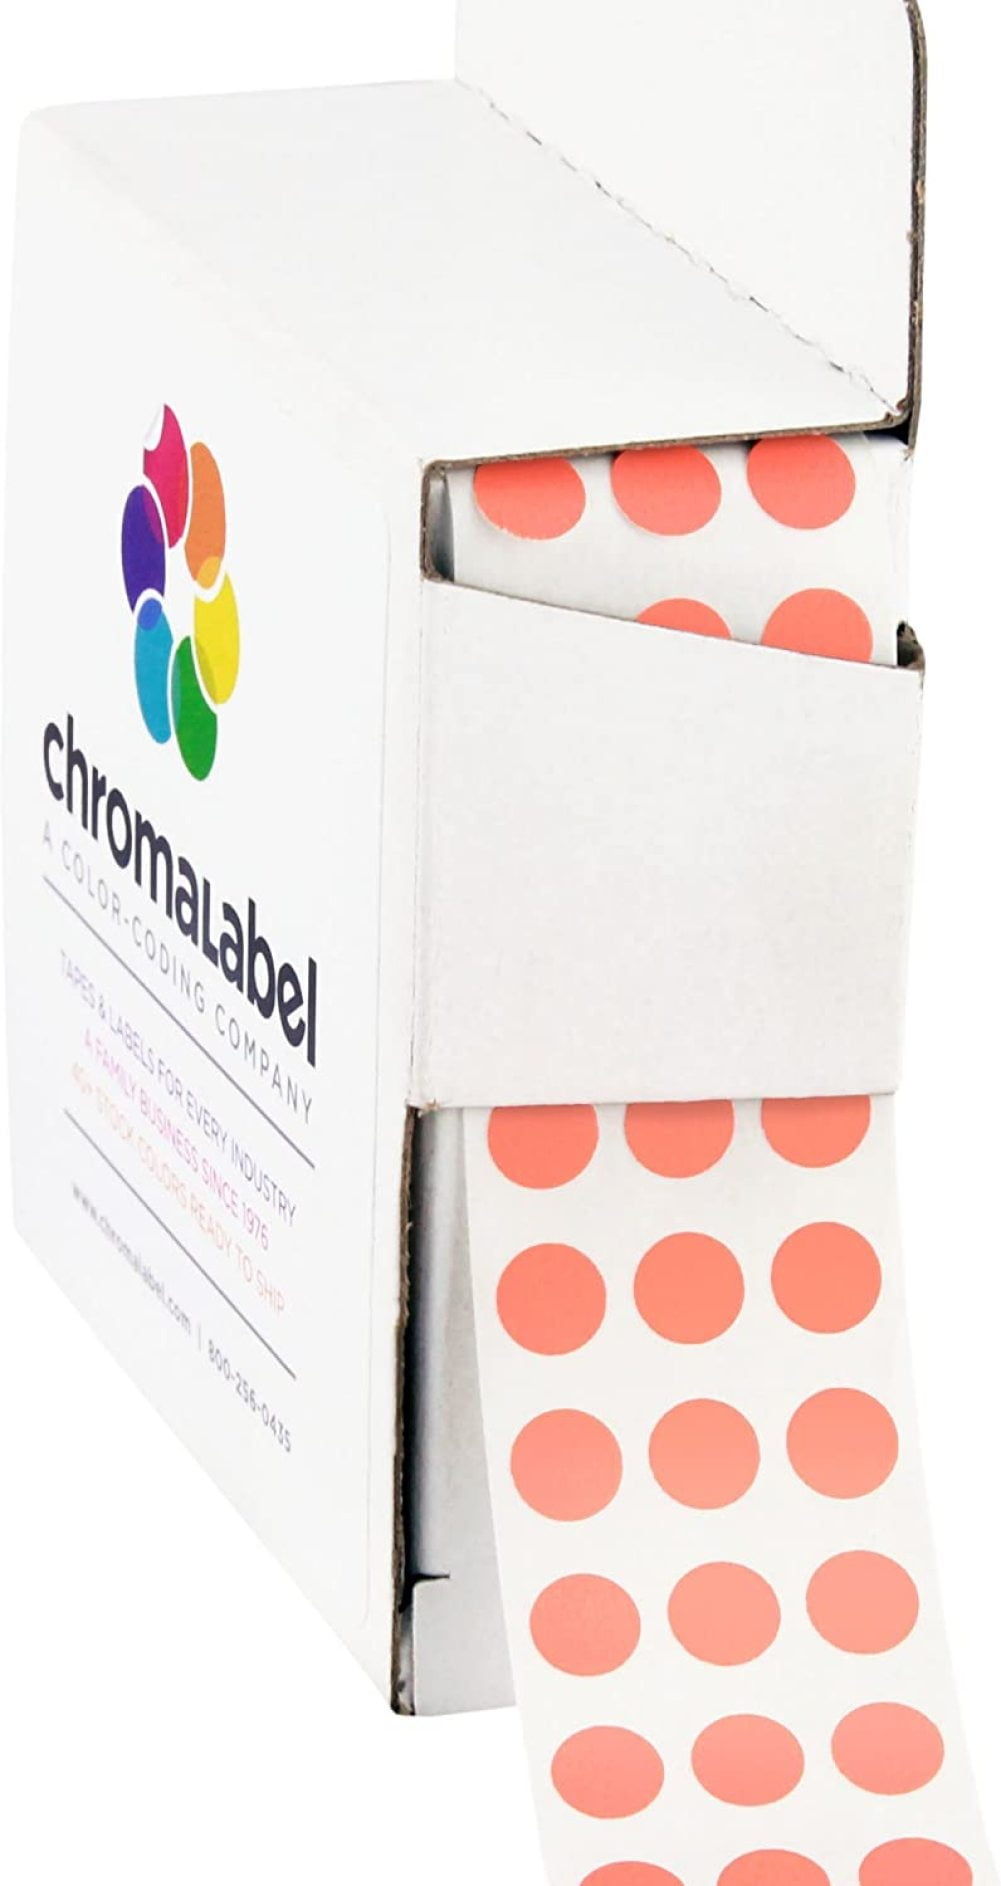 ChromaLabel 1 Inch Round Permanent Color-Code Dot Stickers Black 1000 Pack 